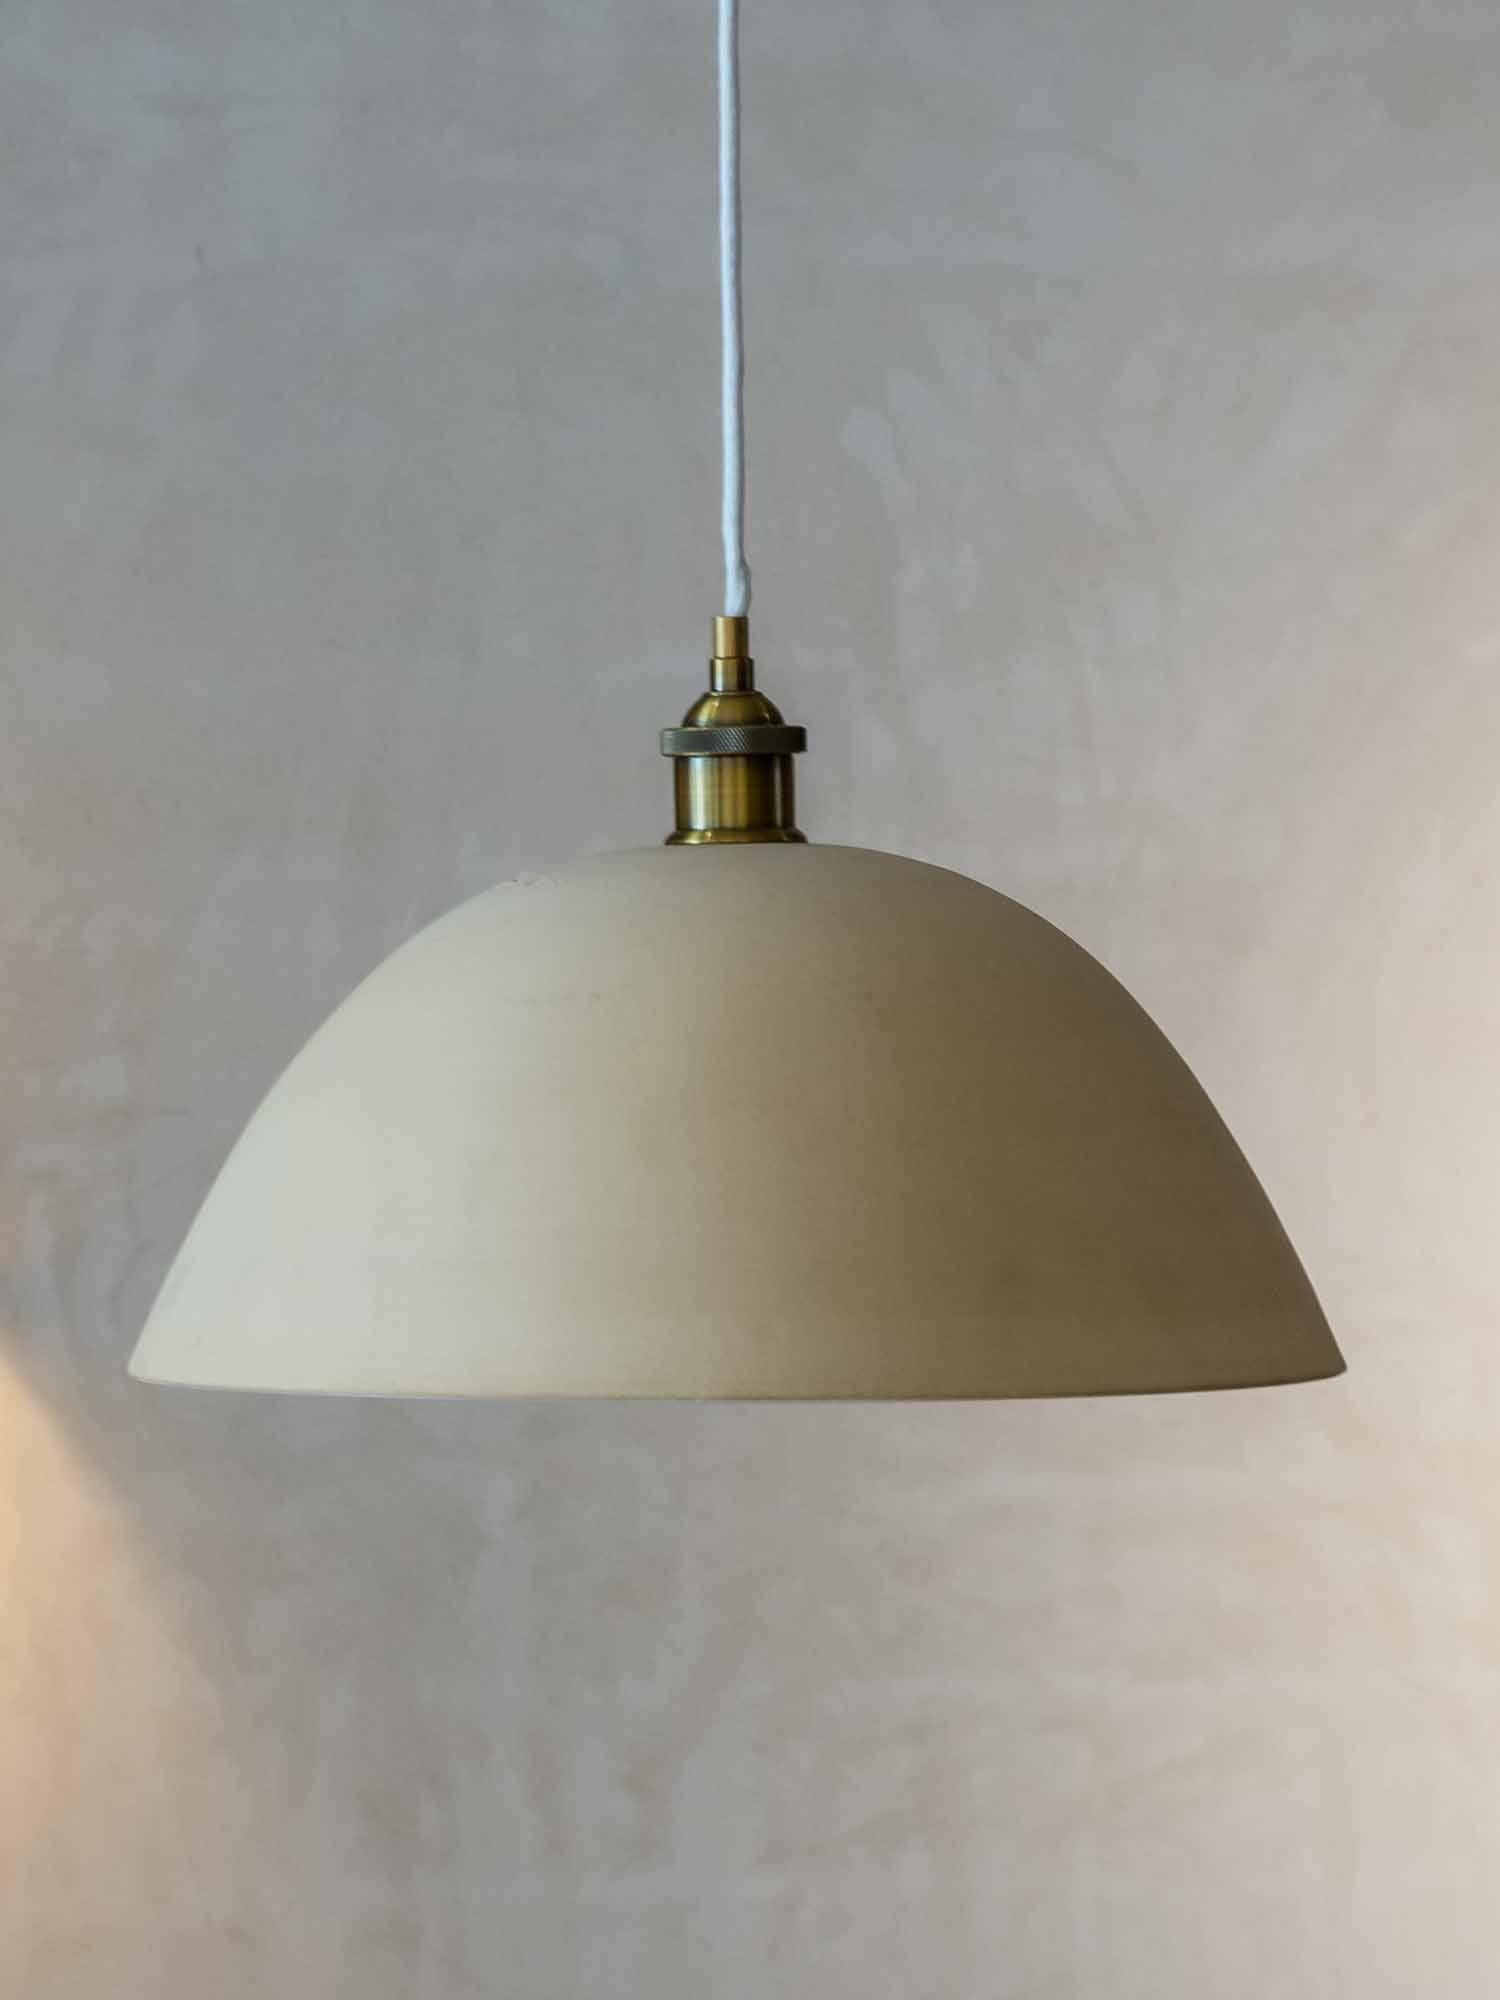 Ceramic pendant lamp handcrafted The electrical connection of the lamp is suitable for both the American and European markets. The interior of the piece is vitrified in white to achieve a better use and projection of light (The bulb is not